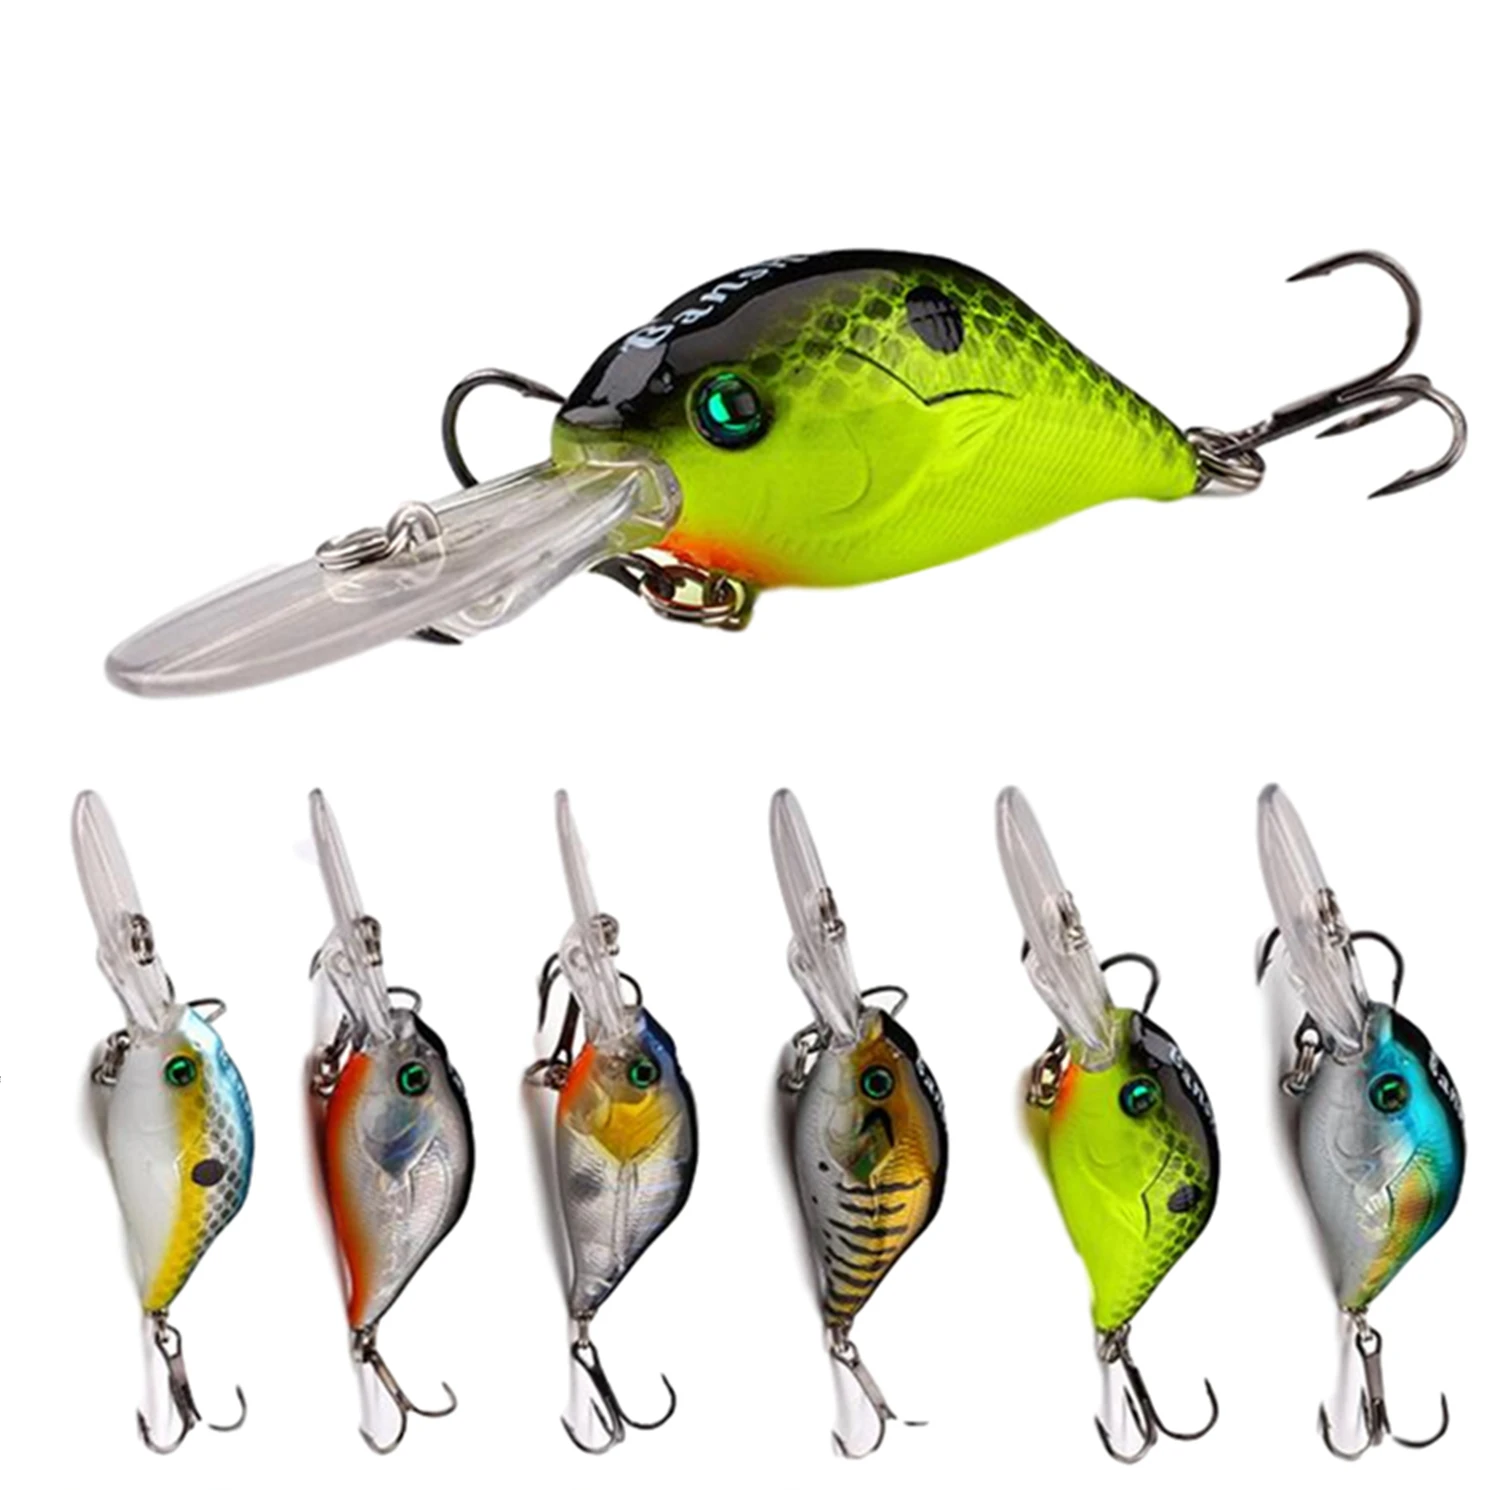 https://ae01.alicdn.com/kf/Hf9be9167082f414f9c8f0641a307a6aeX/Fishing-Lures-Shallow-Deep-Diving-Swim-bait-Fishing-Wobble-Multi-Jointed-Hard-Baits-for-Bass-Trout.jpg